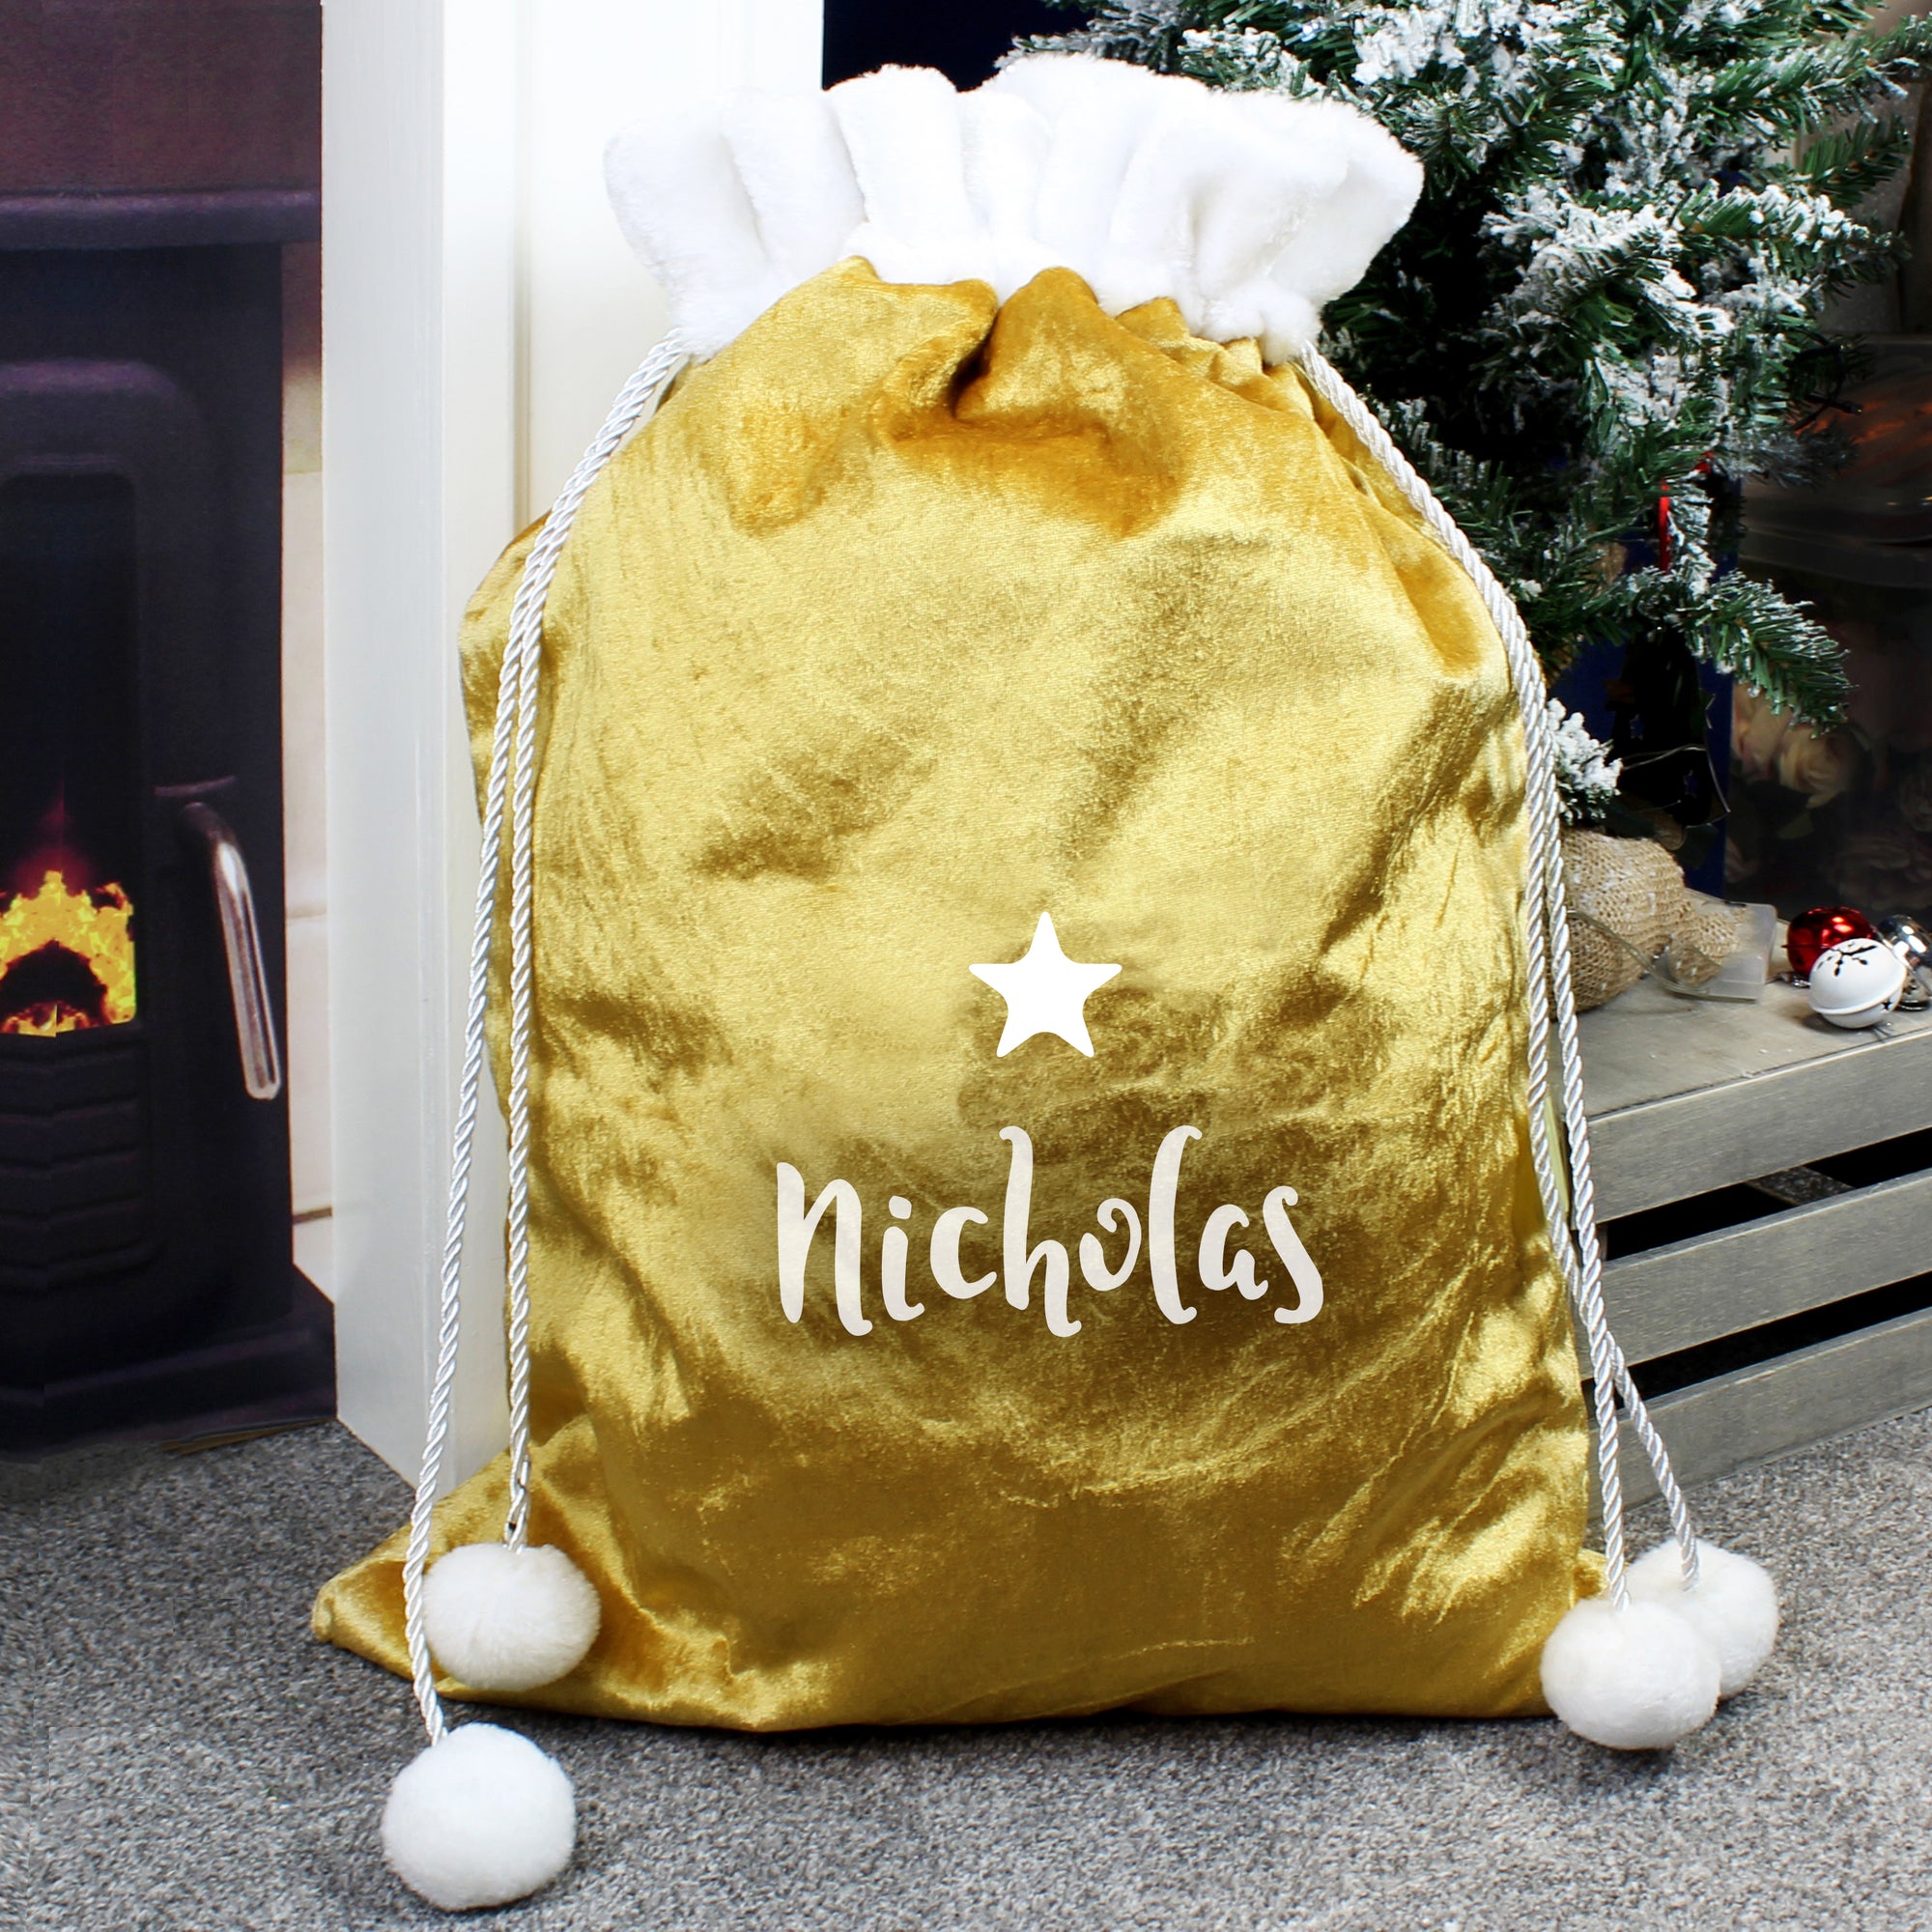 Personalised plush gold Christmas present sack with a white fur trim at the top. The sack has drawstrings to close it with white fur poms poms on the end. The front of the sack features a small white star and a name of your choice can be printed directly below it in a modern white cursive font.